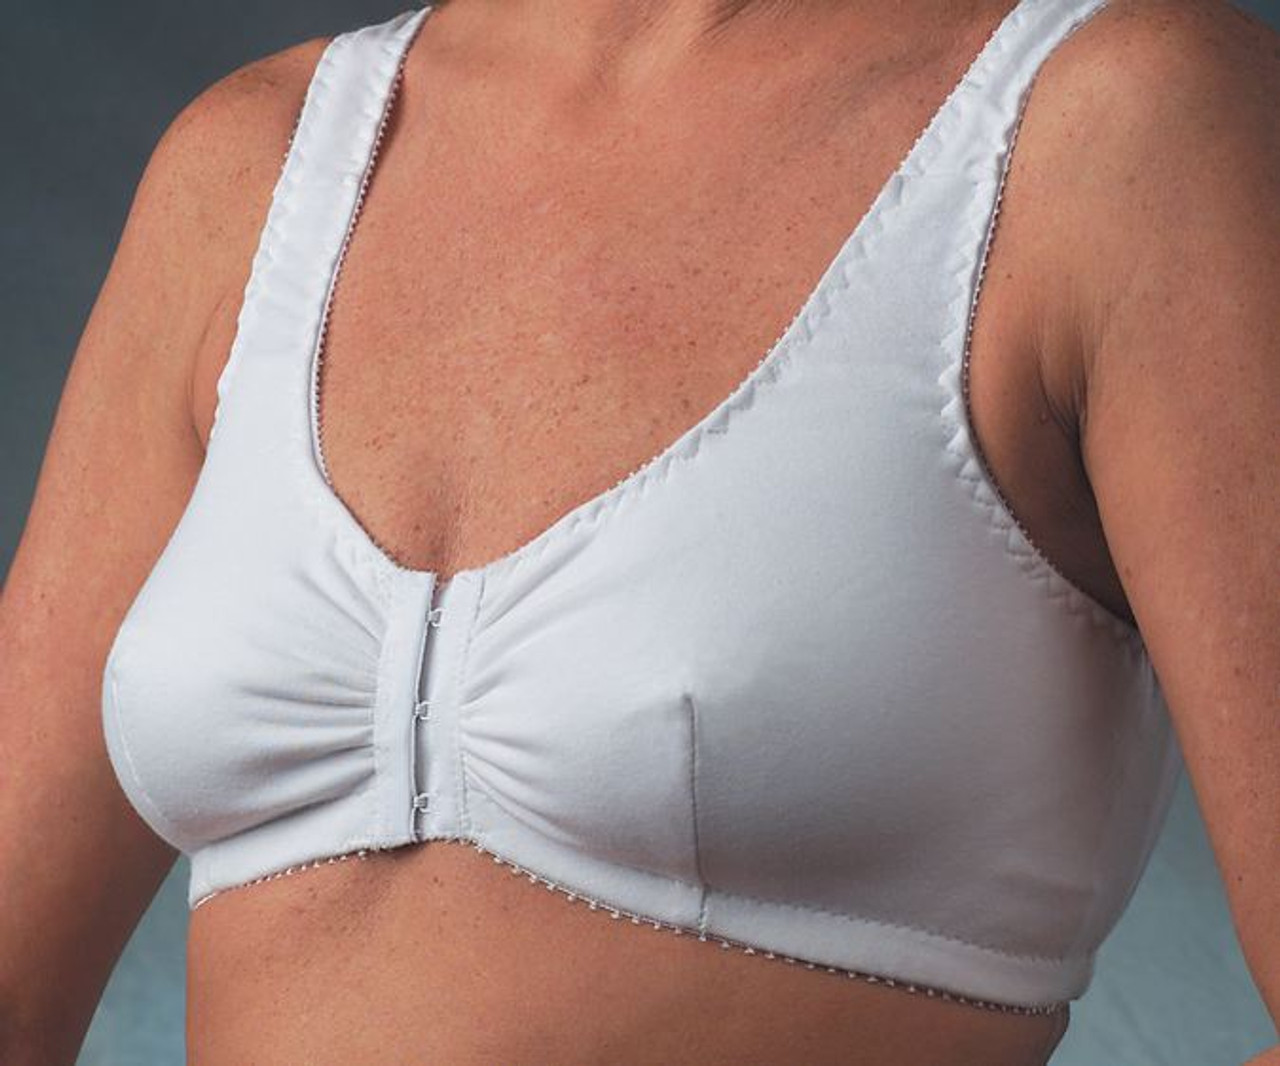 Nearly Me Leisure Mastectomy Bras- Buy leisure for sleeping and